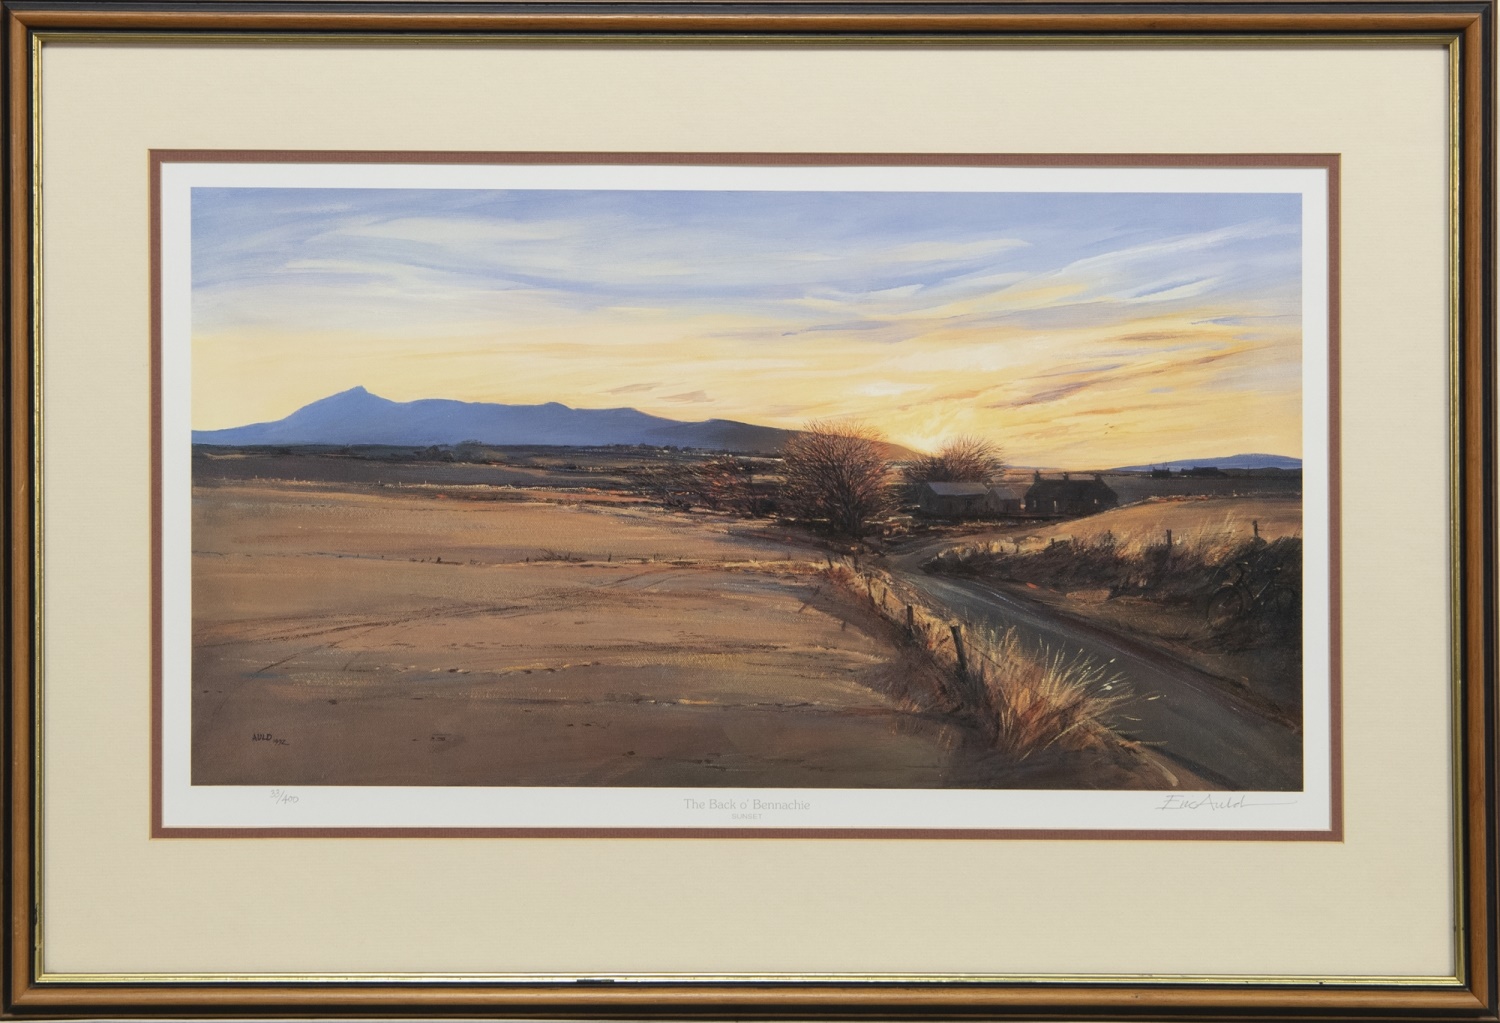 THE BACK O'BENNACHIE SUNSET, A PRINT BY ERIC AULD